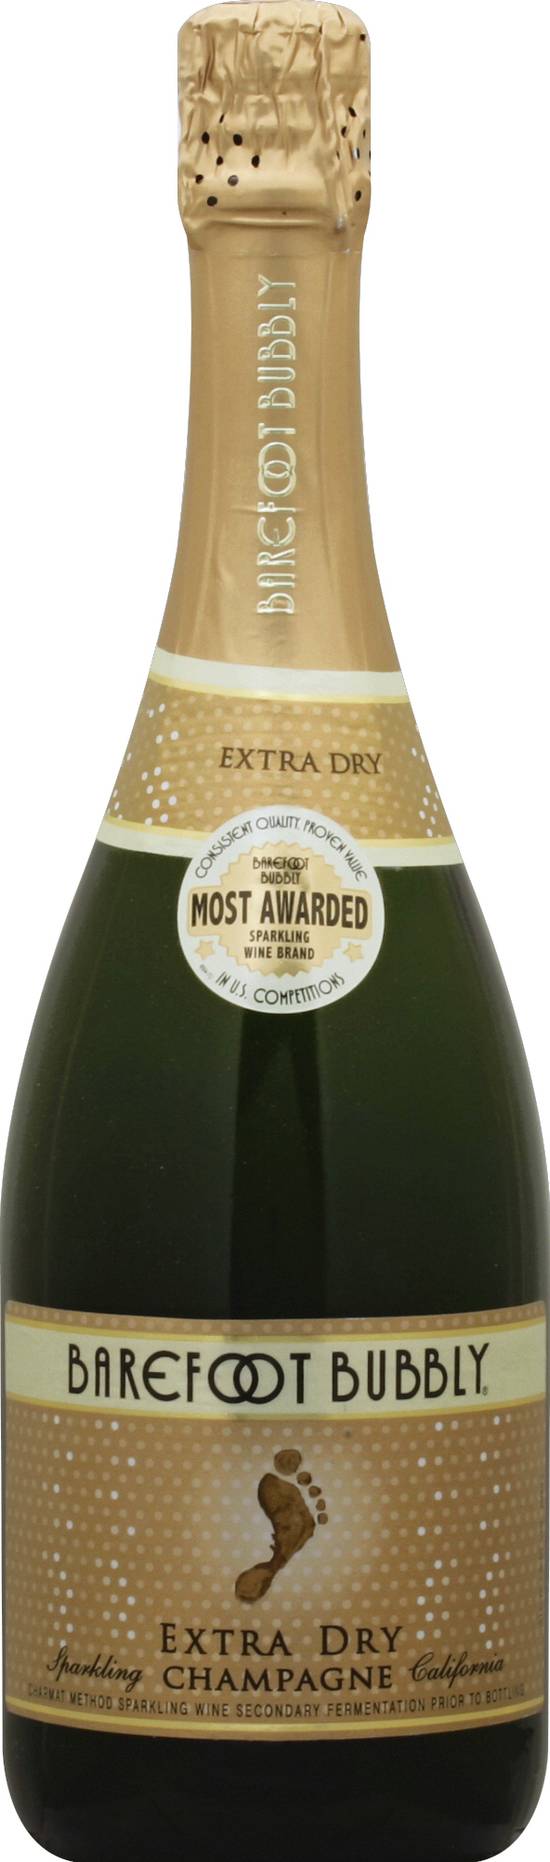 Barefoot Bubbly Sparkling California Extra Dry Champagne (750 ml)